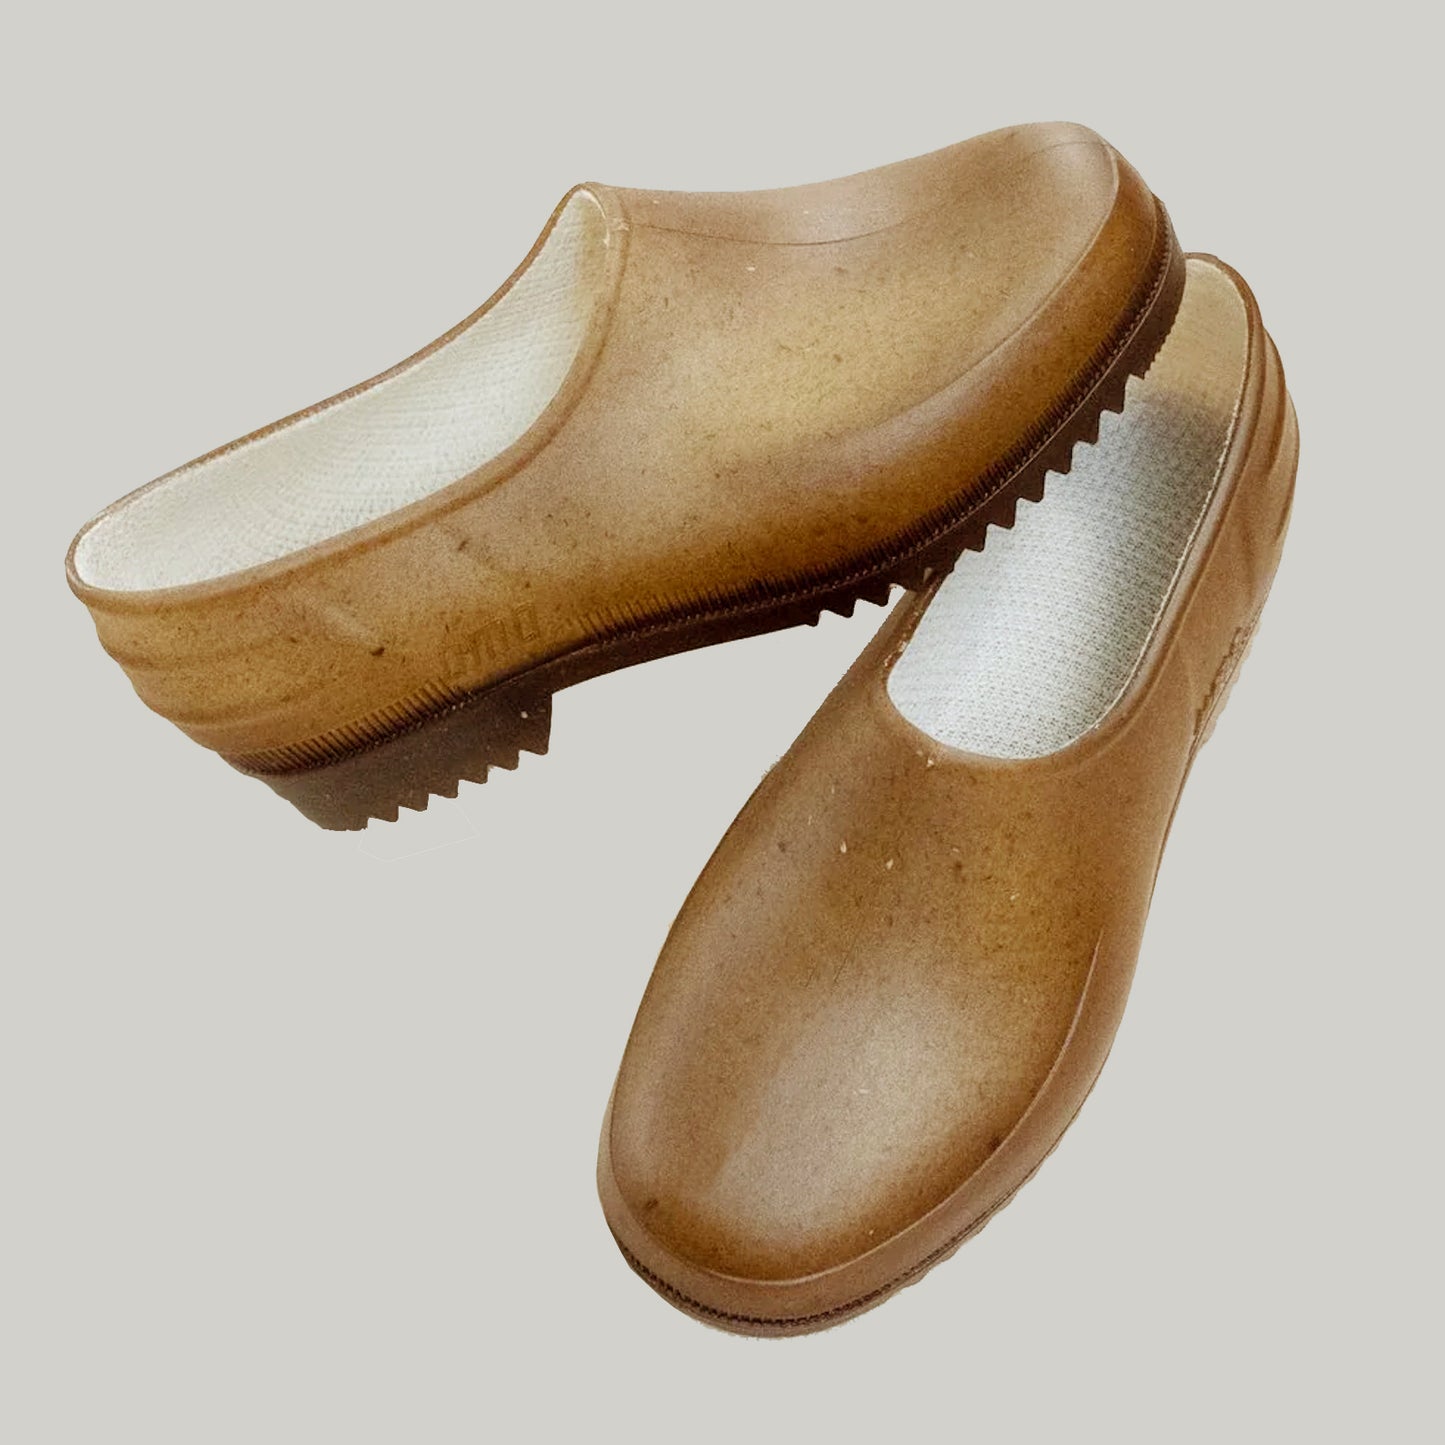 French Recycled Hemp Garden Clogs in Sepia